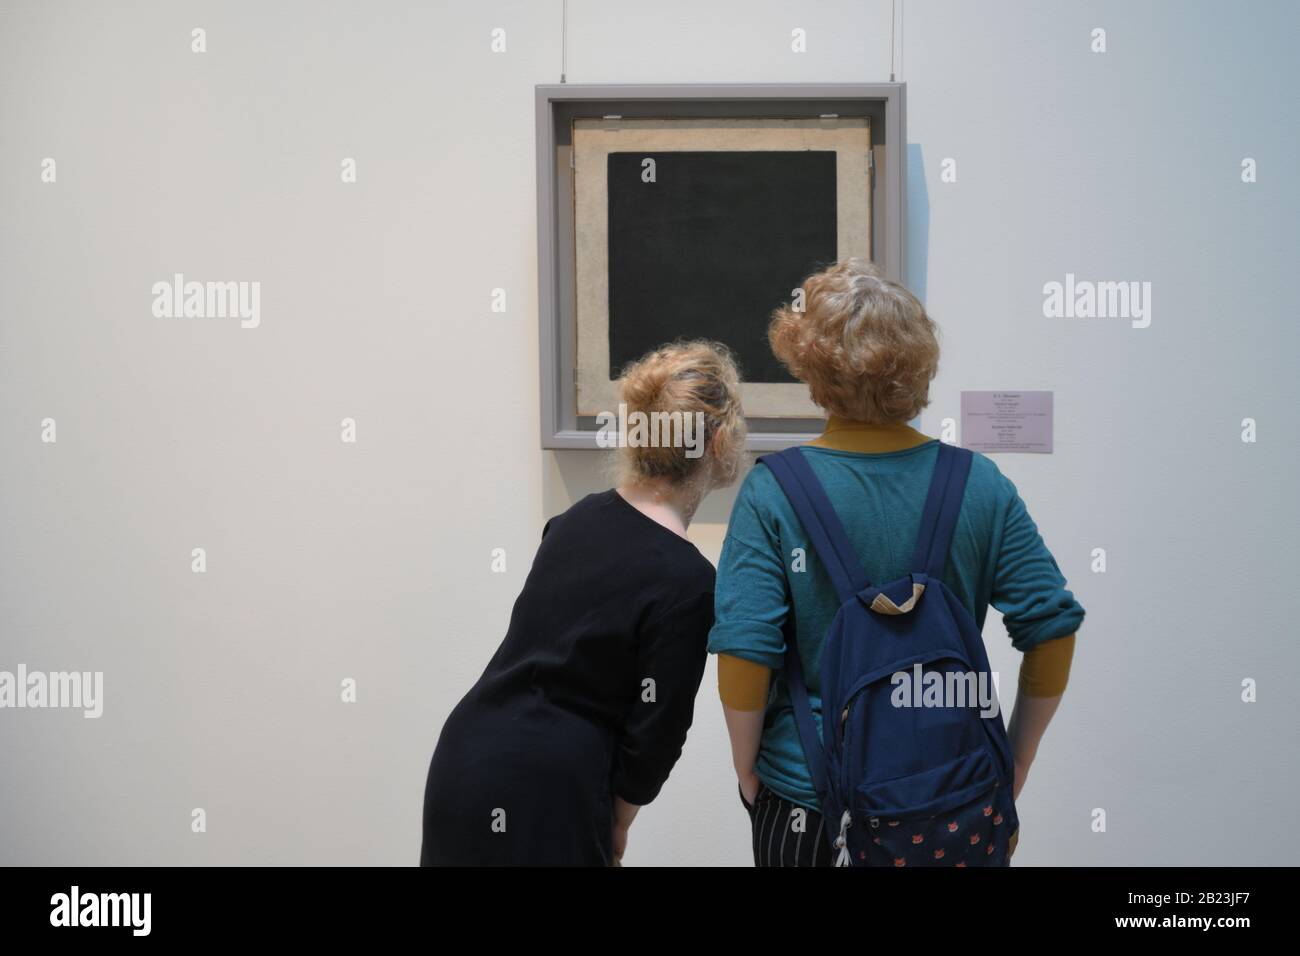 People in the General Staff building of the State Hermitage museum near iconic   Kazimir Malevich  painting Black square. Stock Photo